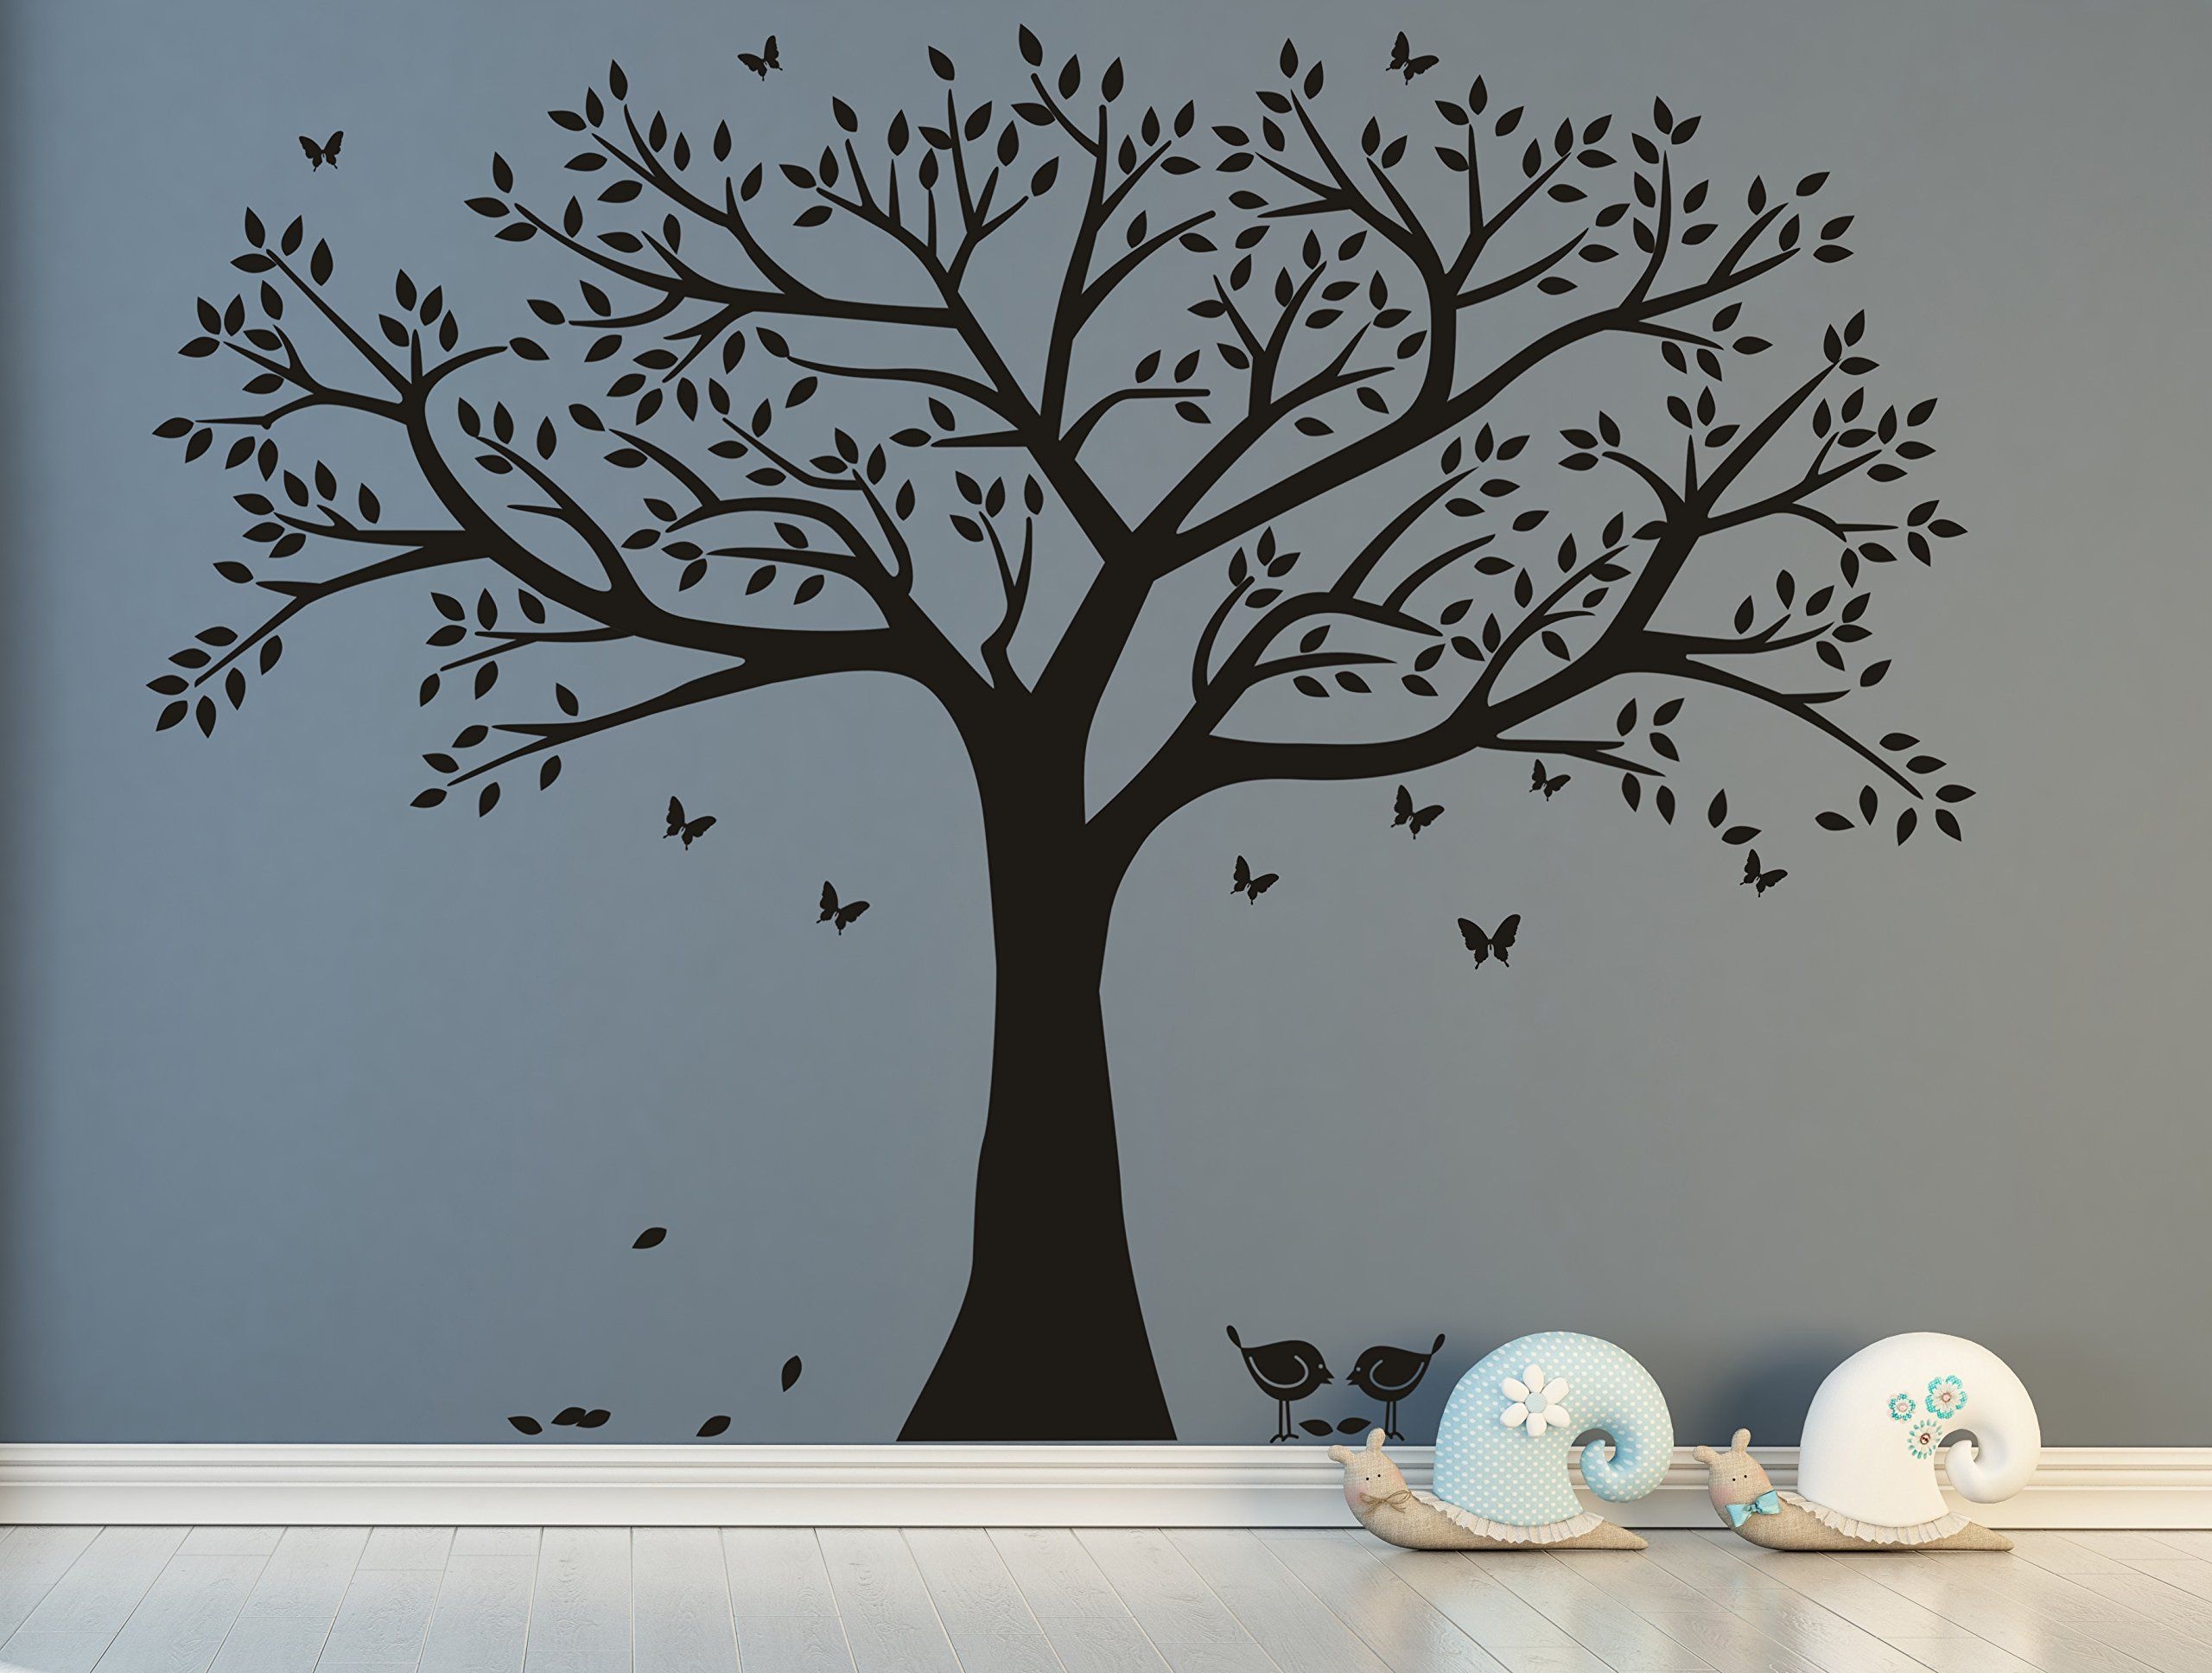 Tree Branch with birds bedroom Lounge Home Graphic wall art sticker vinyl Decal